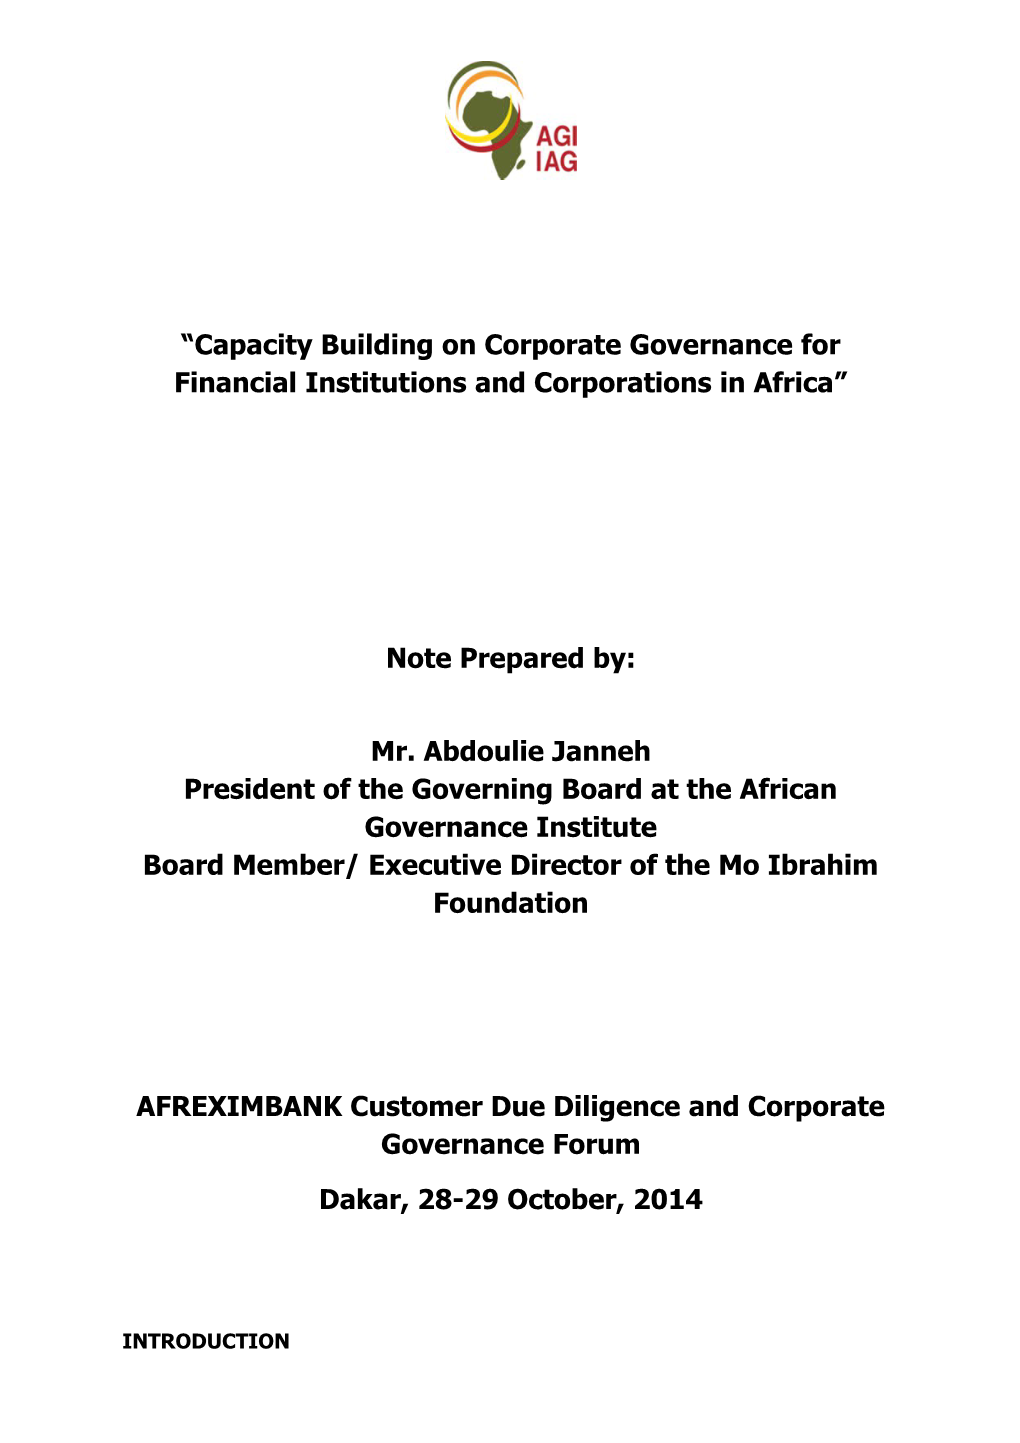 Capacity Building on Corporate Governance for Financial Institutions and Corporations